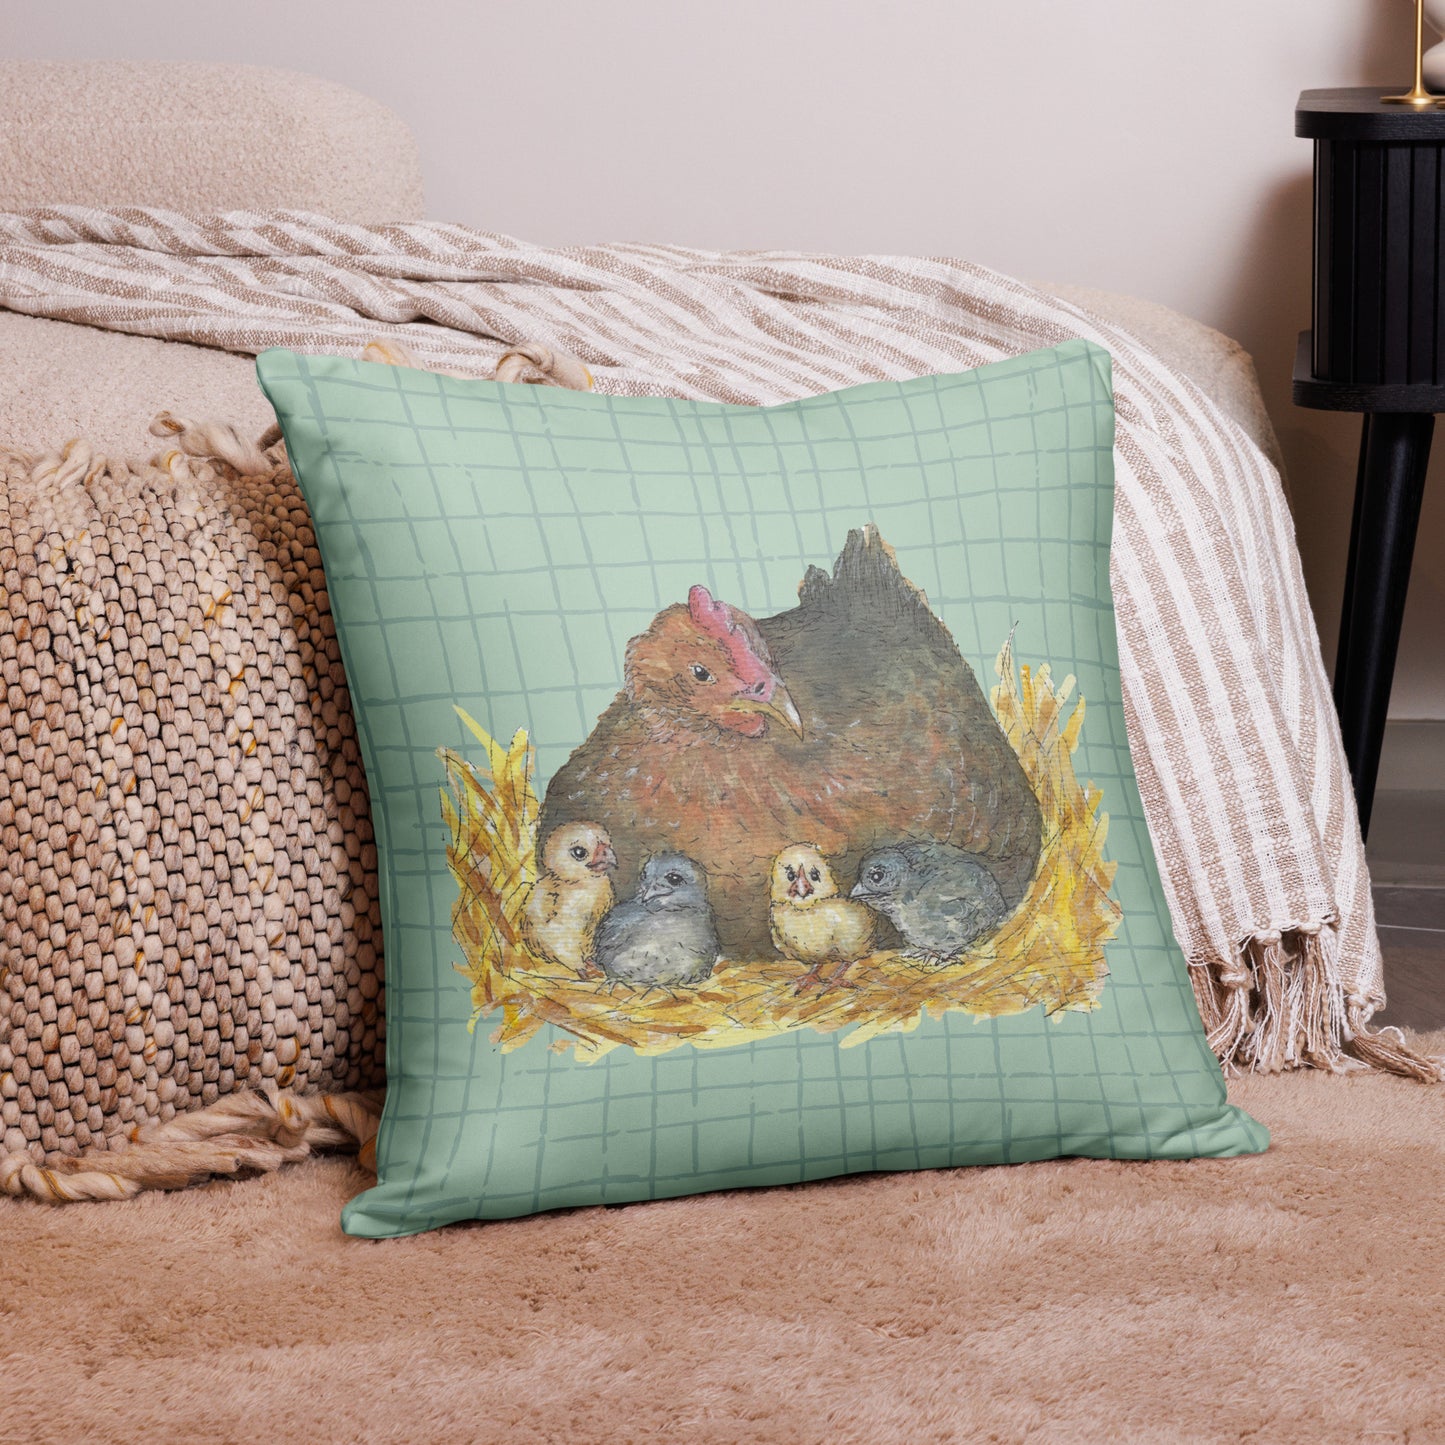 22 by 22 inch mother hen decorative throw pillow. Features Heather Silver's watercolor print of a mother hen and chicks on a green cross-hatched background. Image printed on both sides. Has a hidden zipper and washable cover. Comes with shape-retaining insert. Back view of pillow on tan carpet by beige bed.